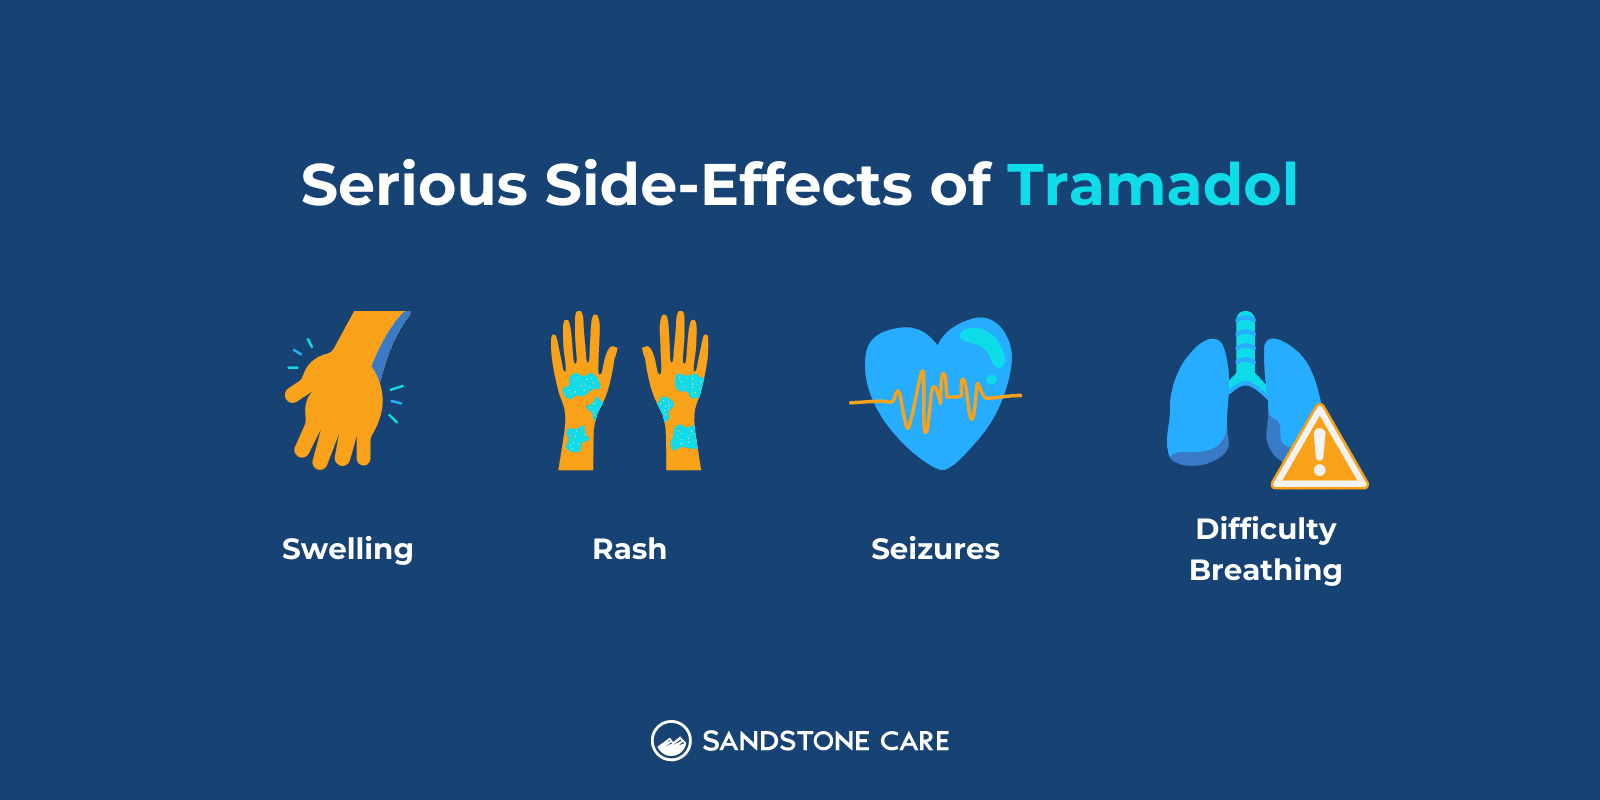 Serious Side-Effects of Tramadol text written on top of lists of side-effects and relevant illustration: Swelling, Rash, Seizures, Difficulty Breathing